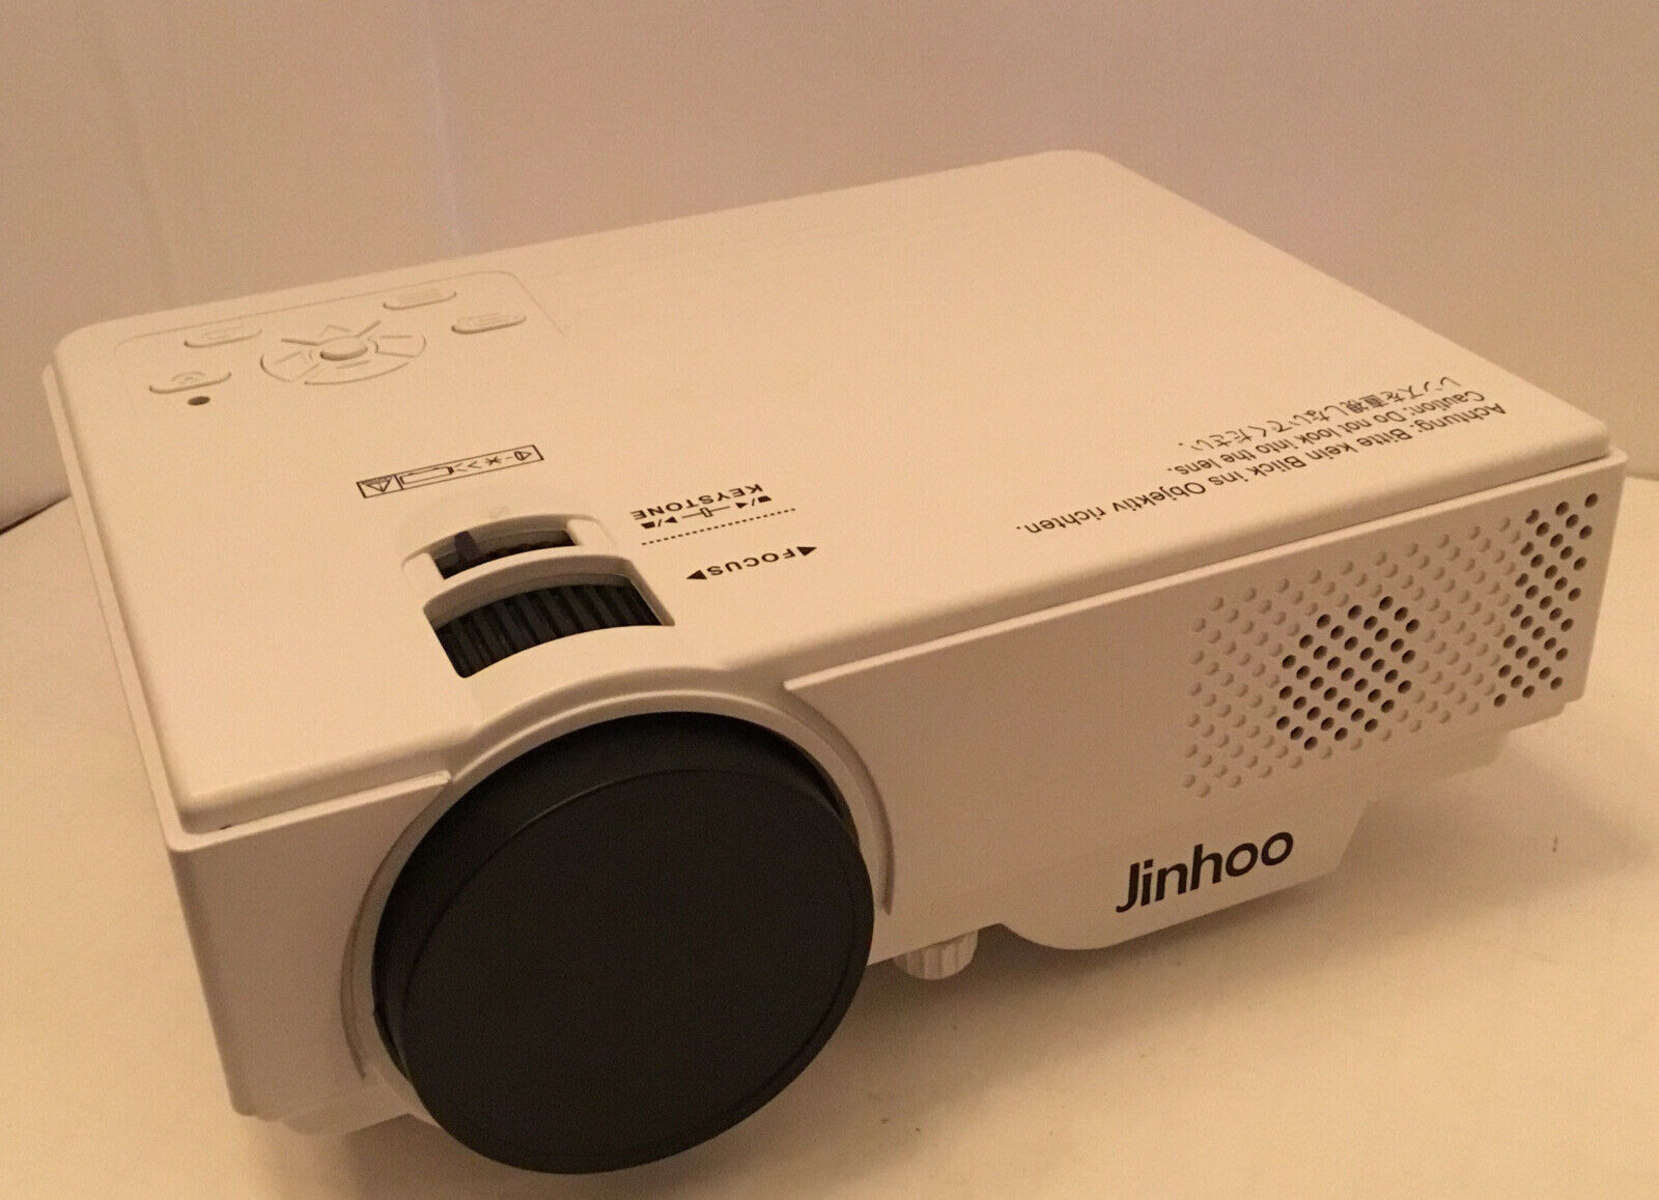 How To Connect Phone To Jinhoo Projector